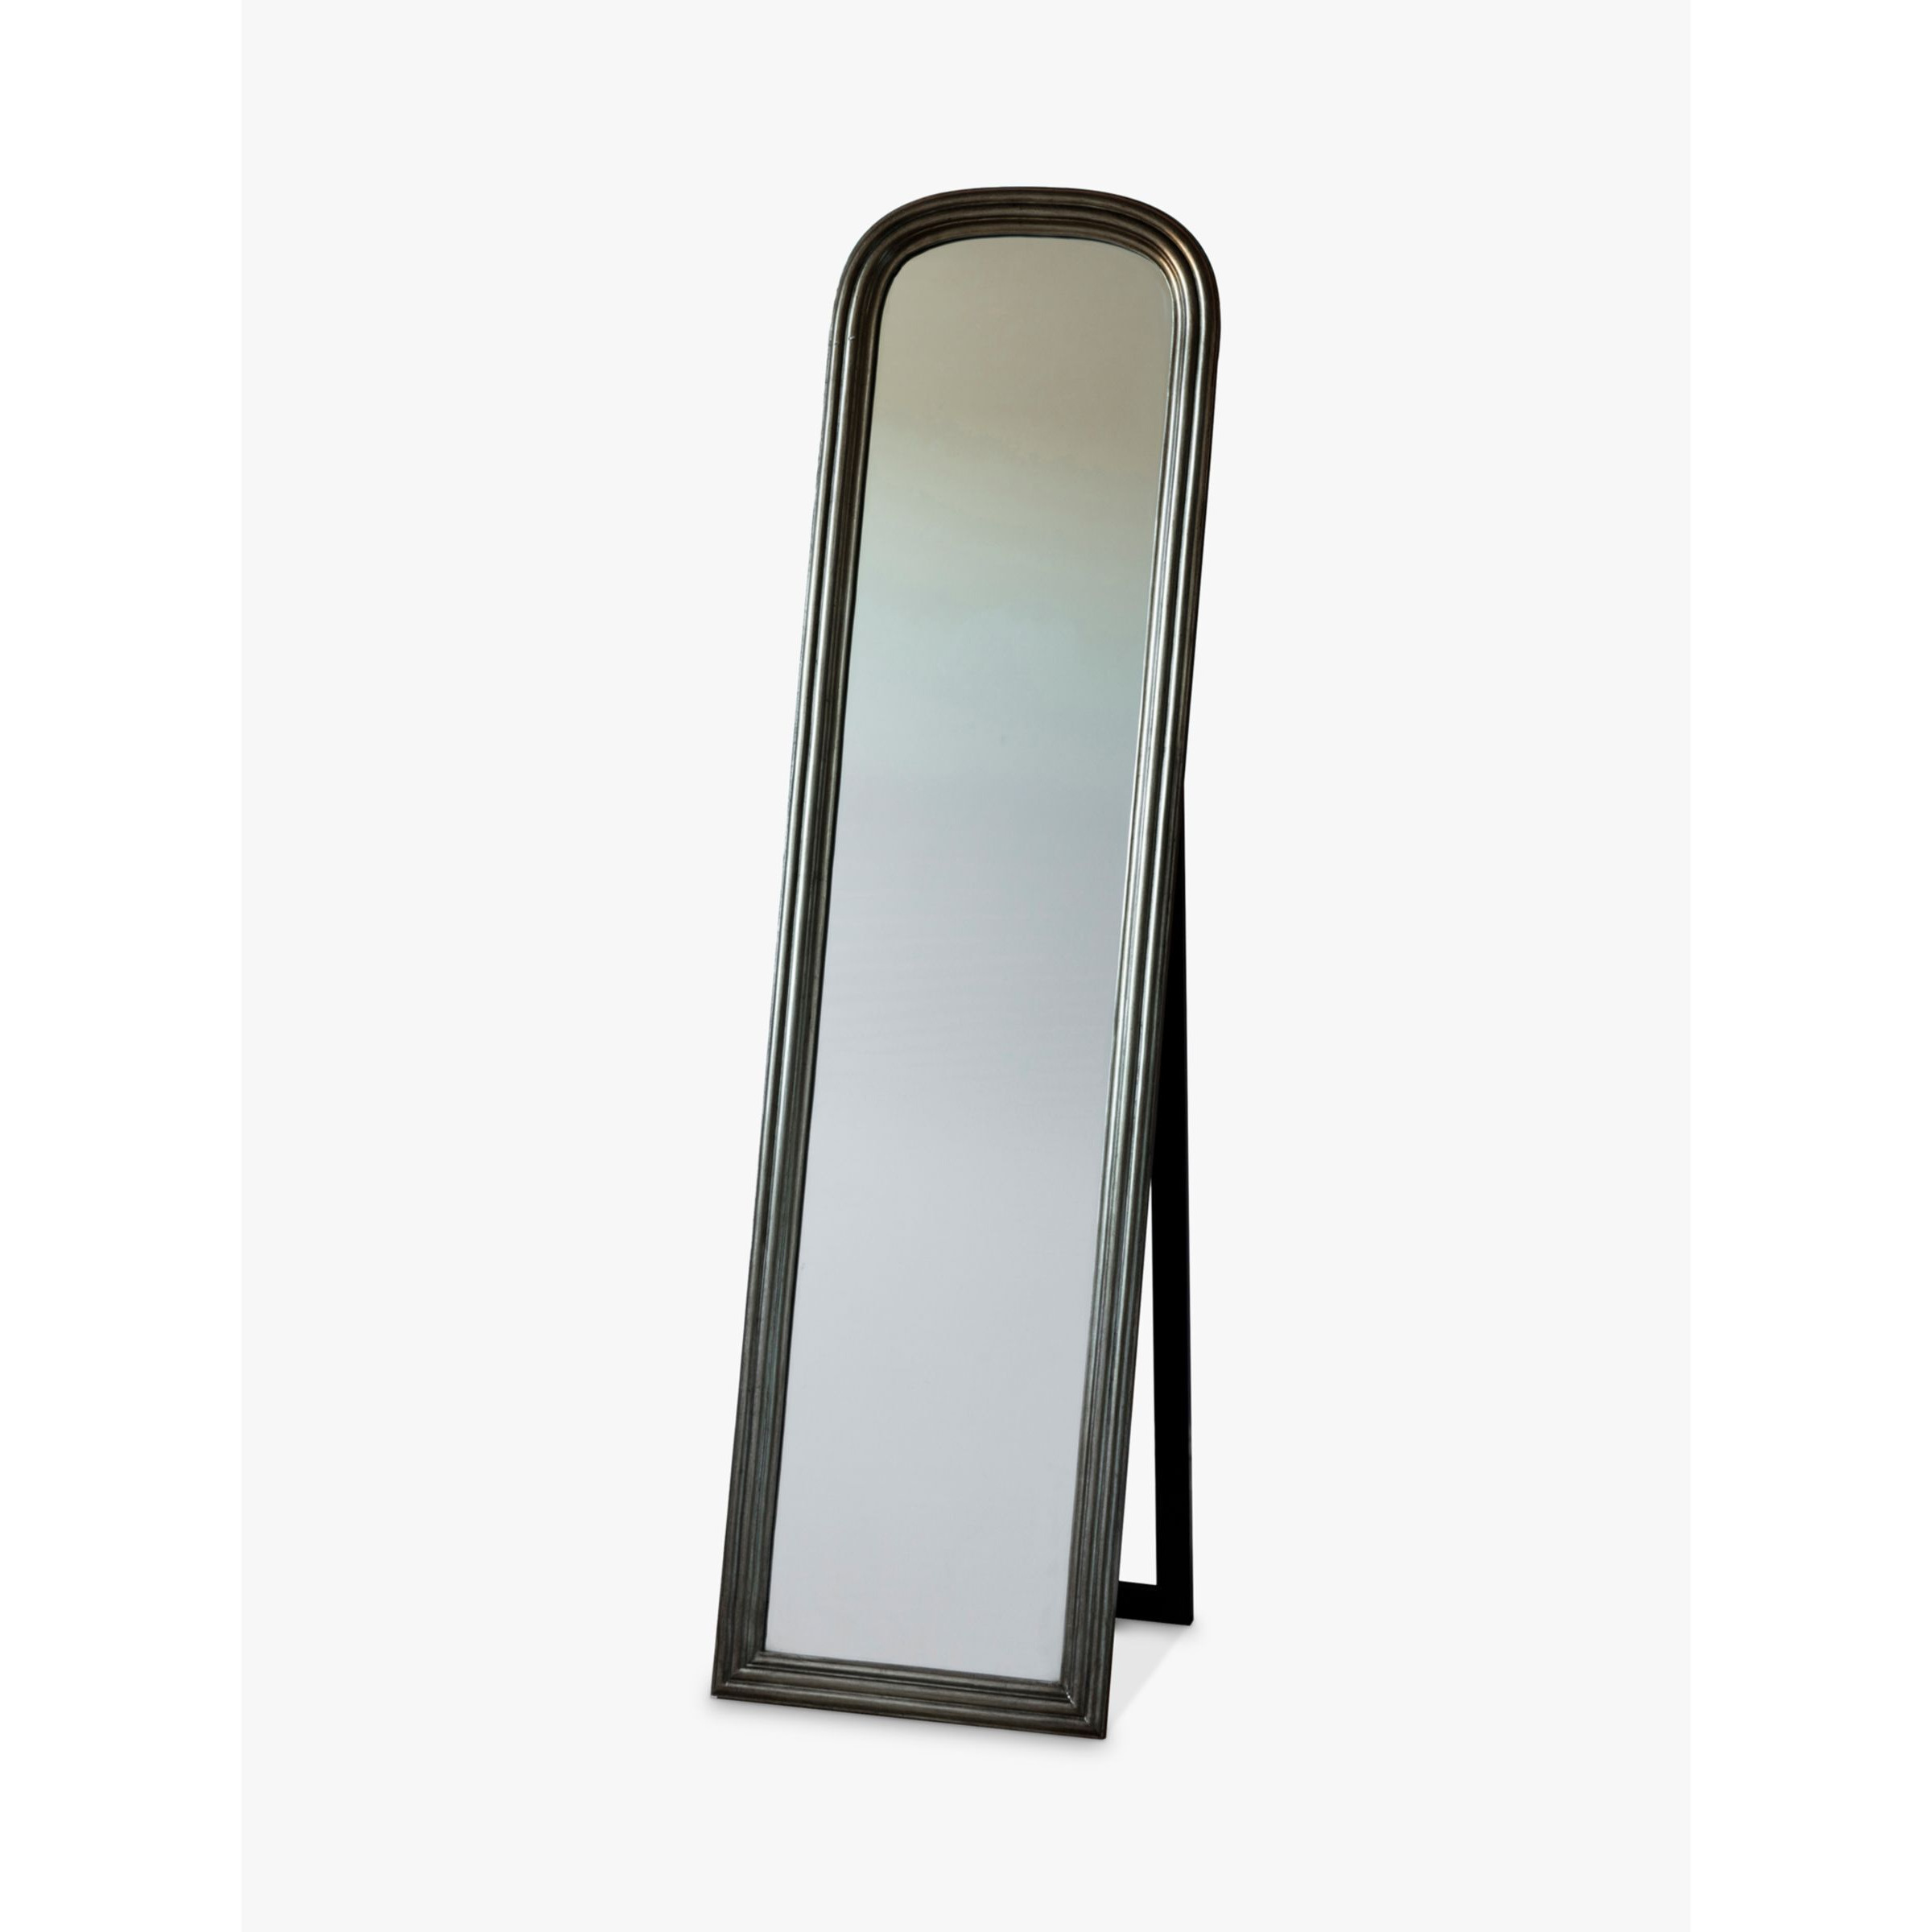 Gallery Direct Beck Cheval Mirror, 160 x 42cm, Brushed Brass - image 1